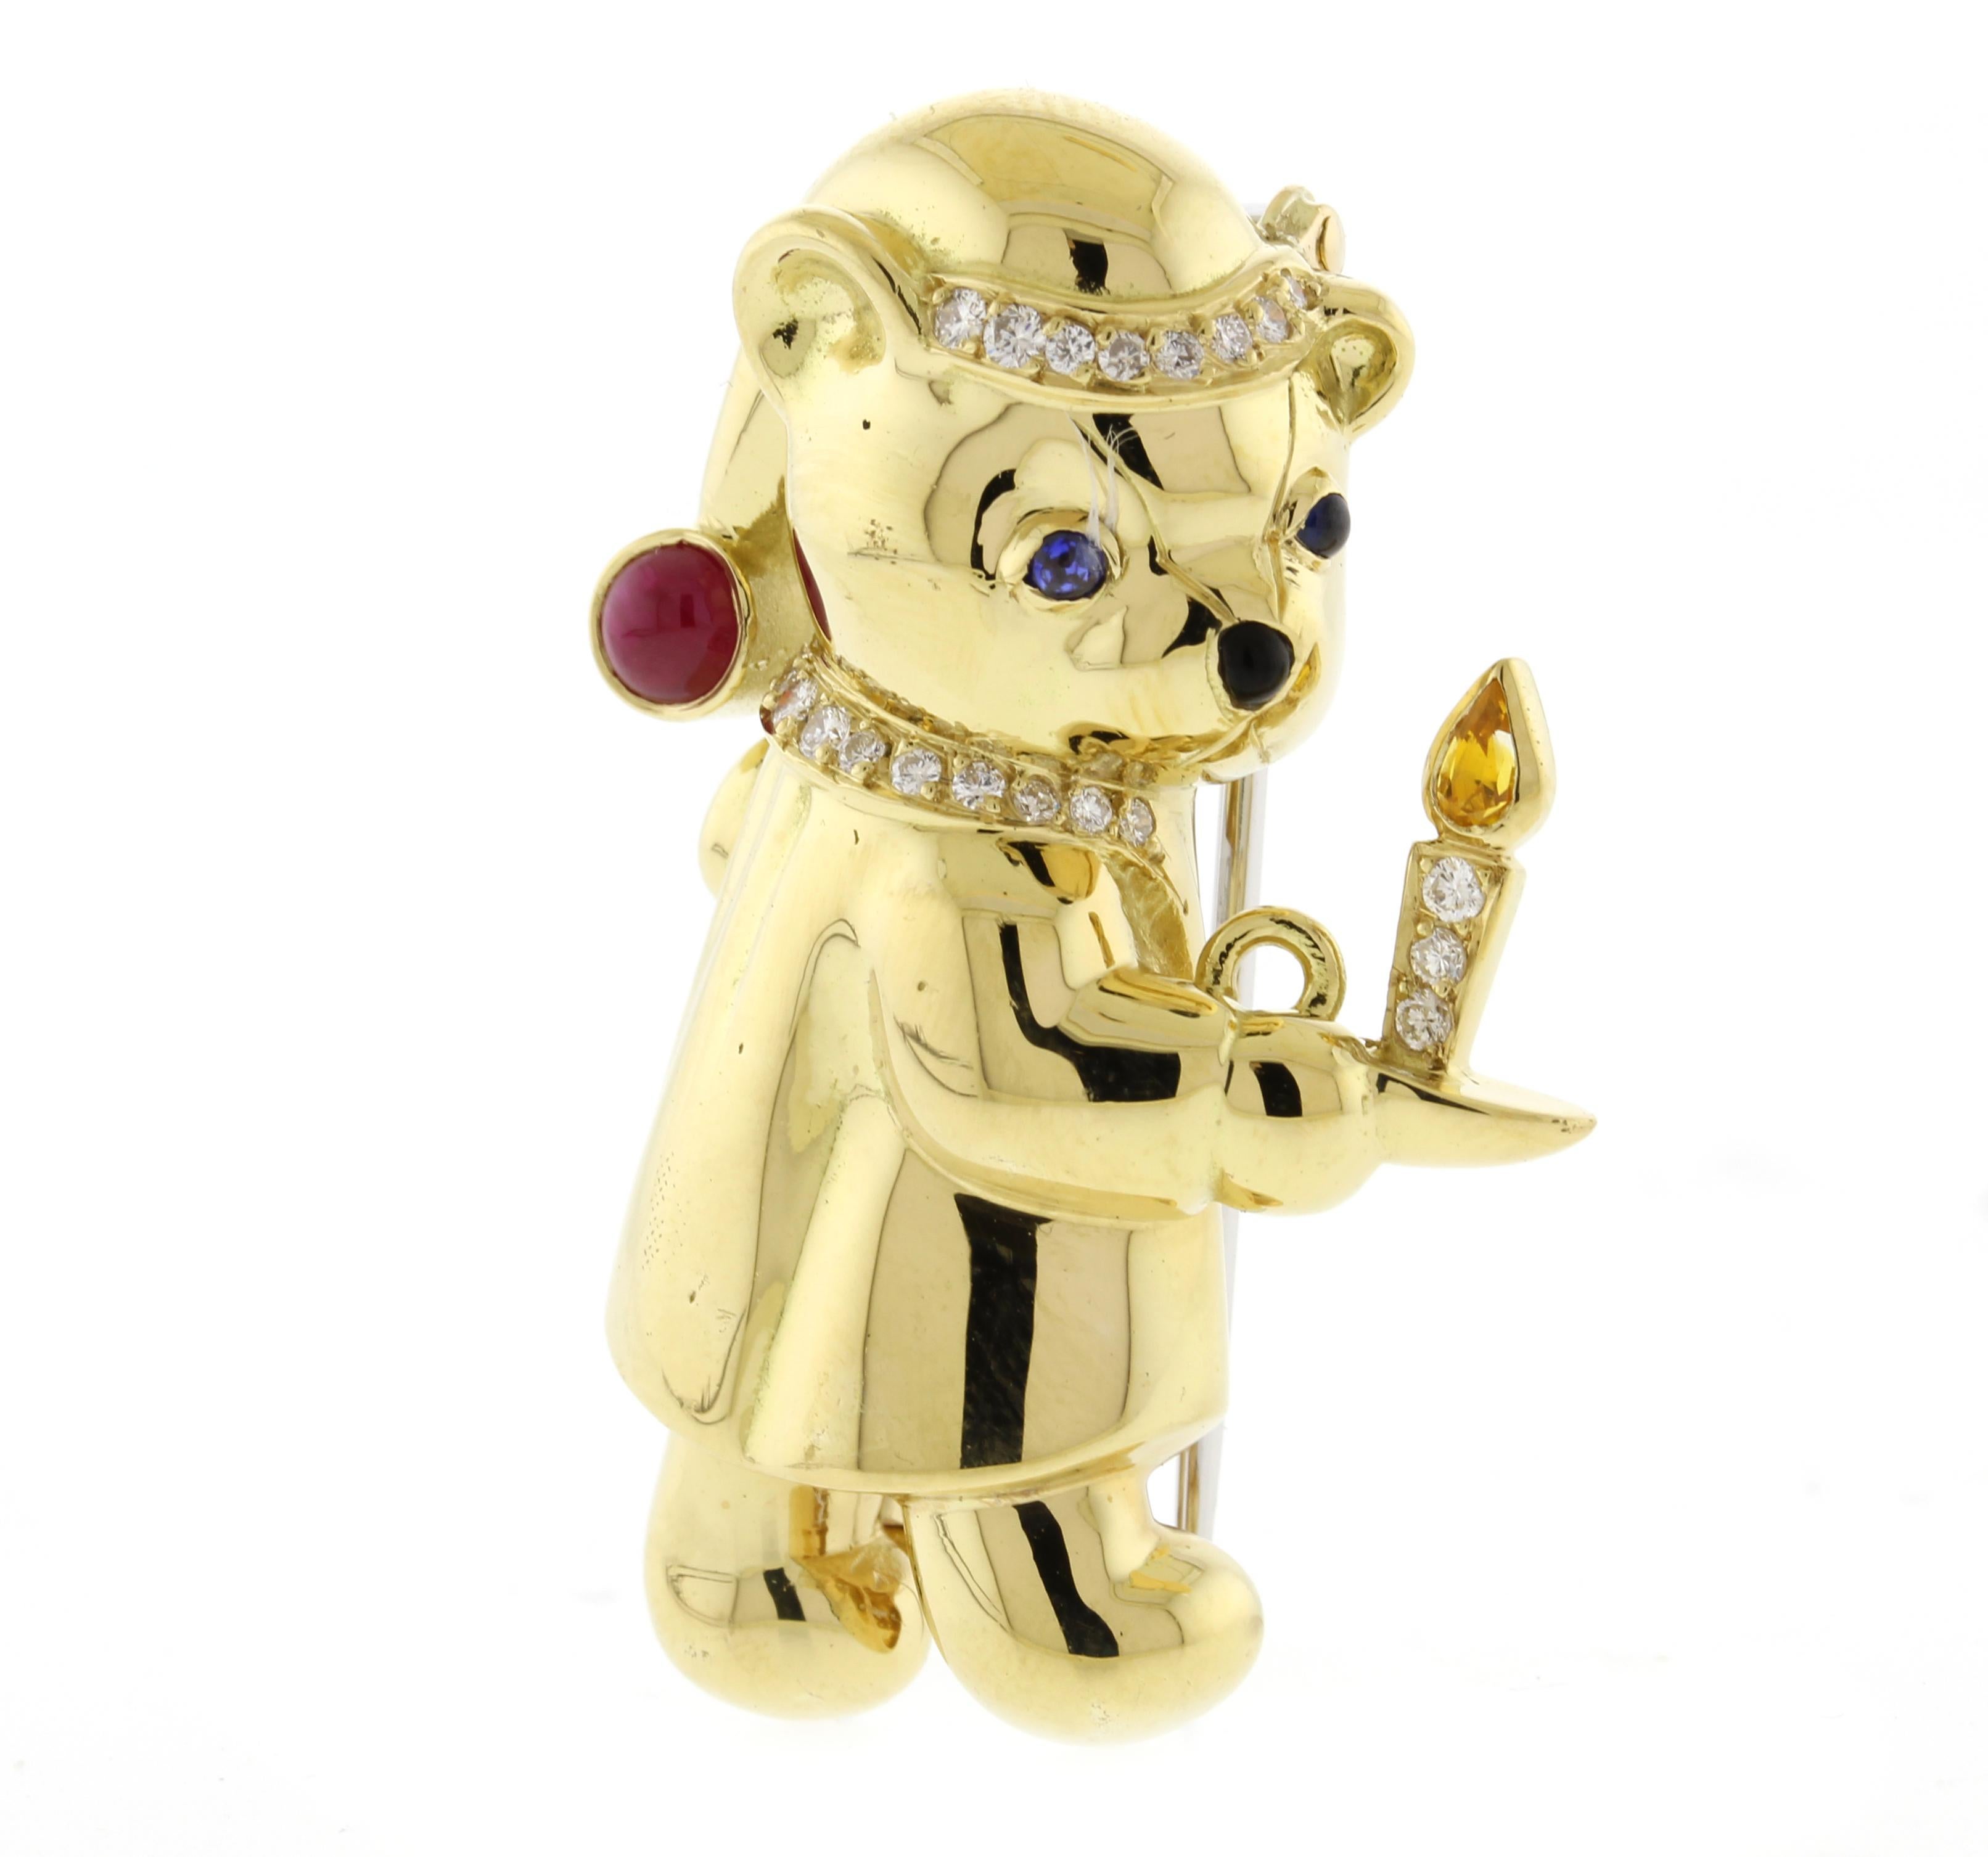 
Jonathan Ralston, the visionary designer behind David Morris. In the late 1980s, Ralston crafted a remarkable line of 18 karat bear brooches, each an embodiment of exclusivity. Renowned for their impeccable craftsmanship and meticulous attention to